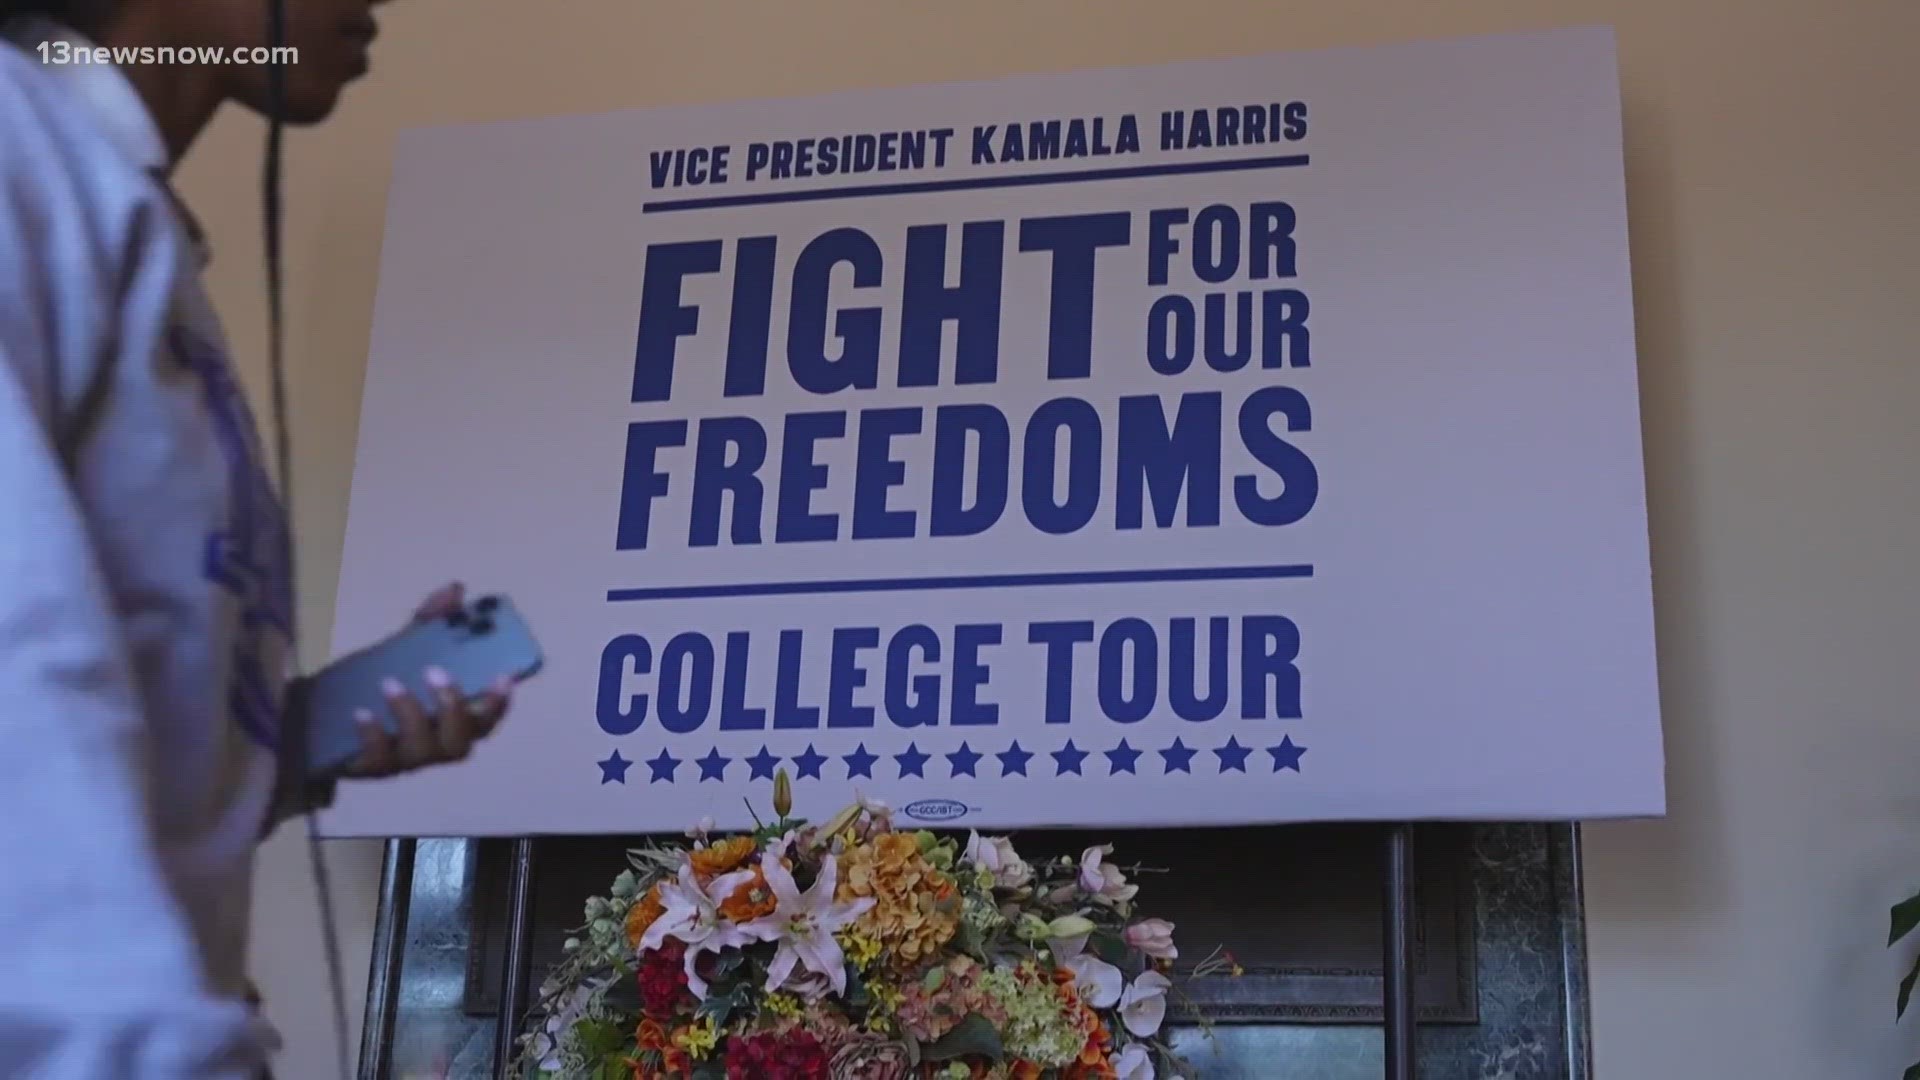 Vice President Kamala Harris visits Hampton where she will kick off her "Fight For Our Freedoms" college tour.